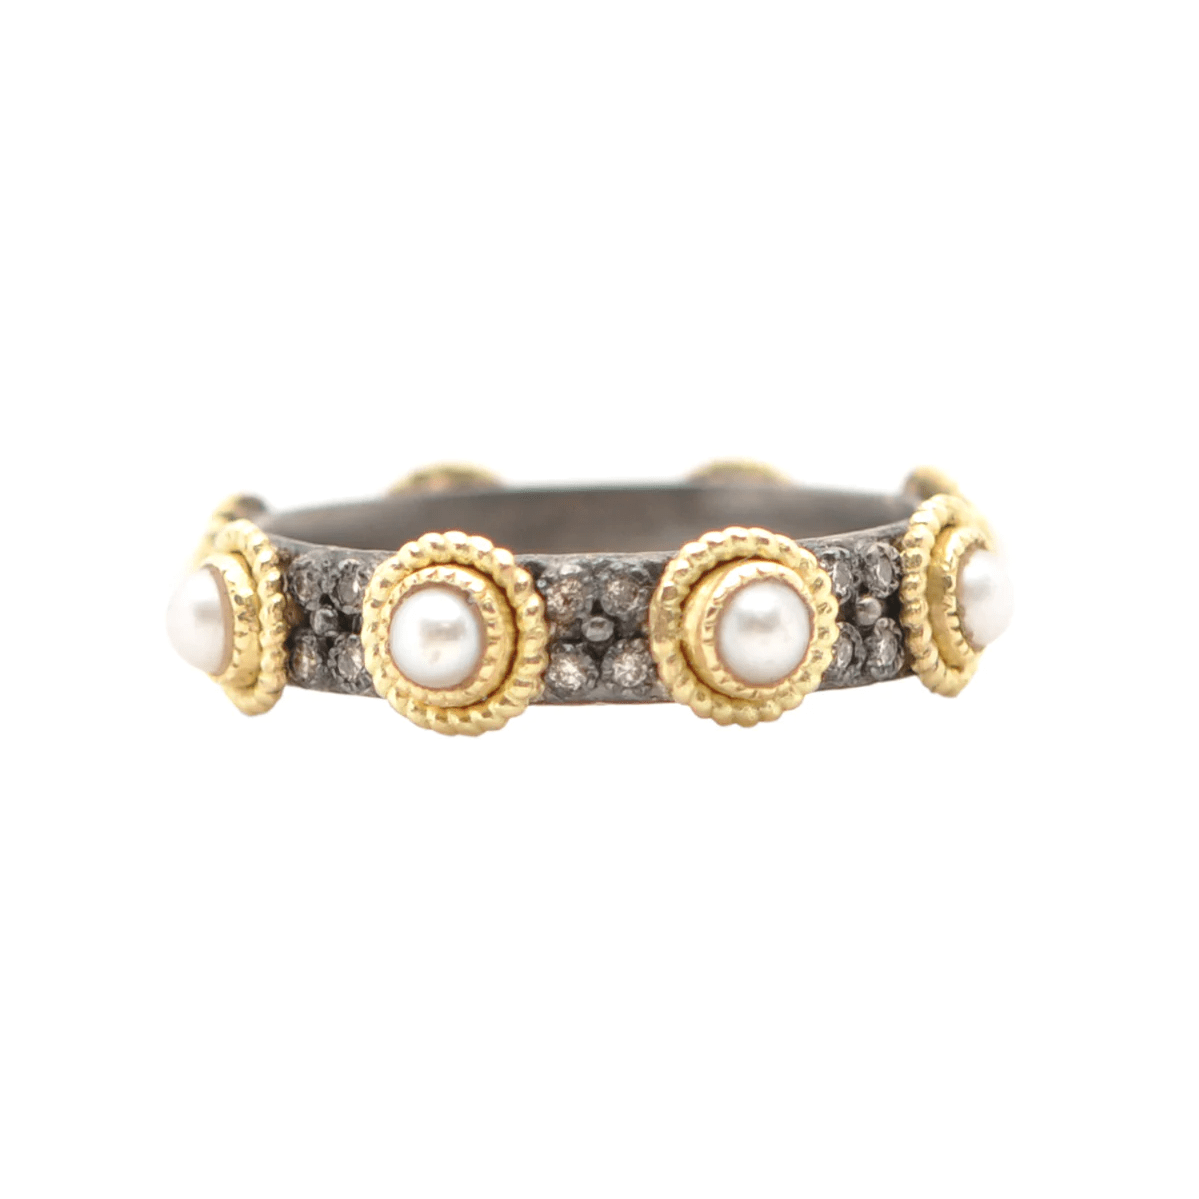 Blackened Sterling Silver and Gold Champagne Diamond and Pearl Ring, Sterling silver and 18k yellow gold', Long's Jewelers